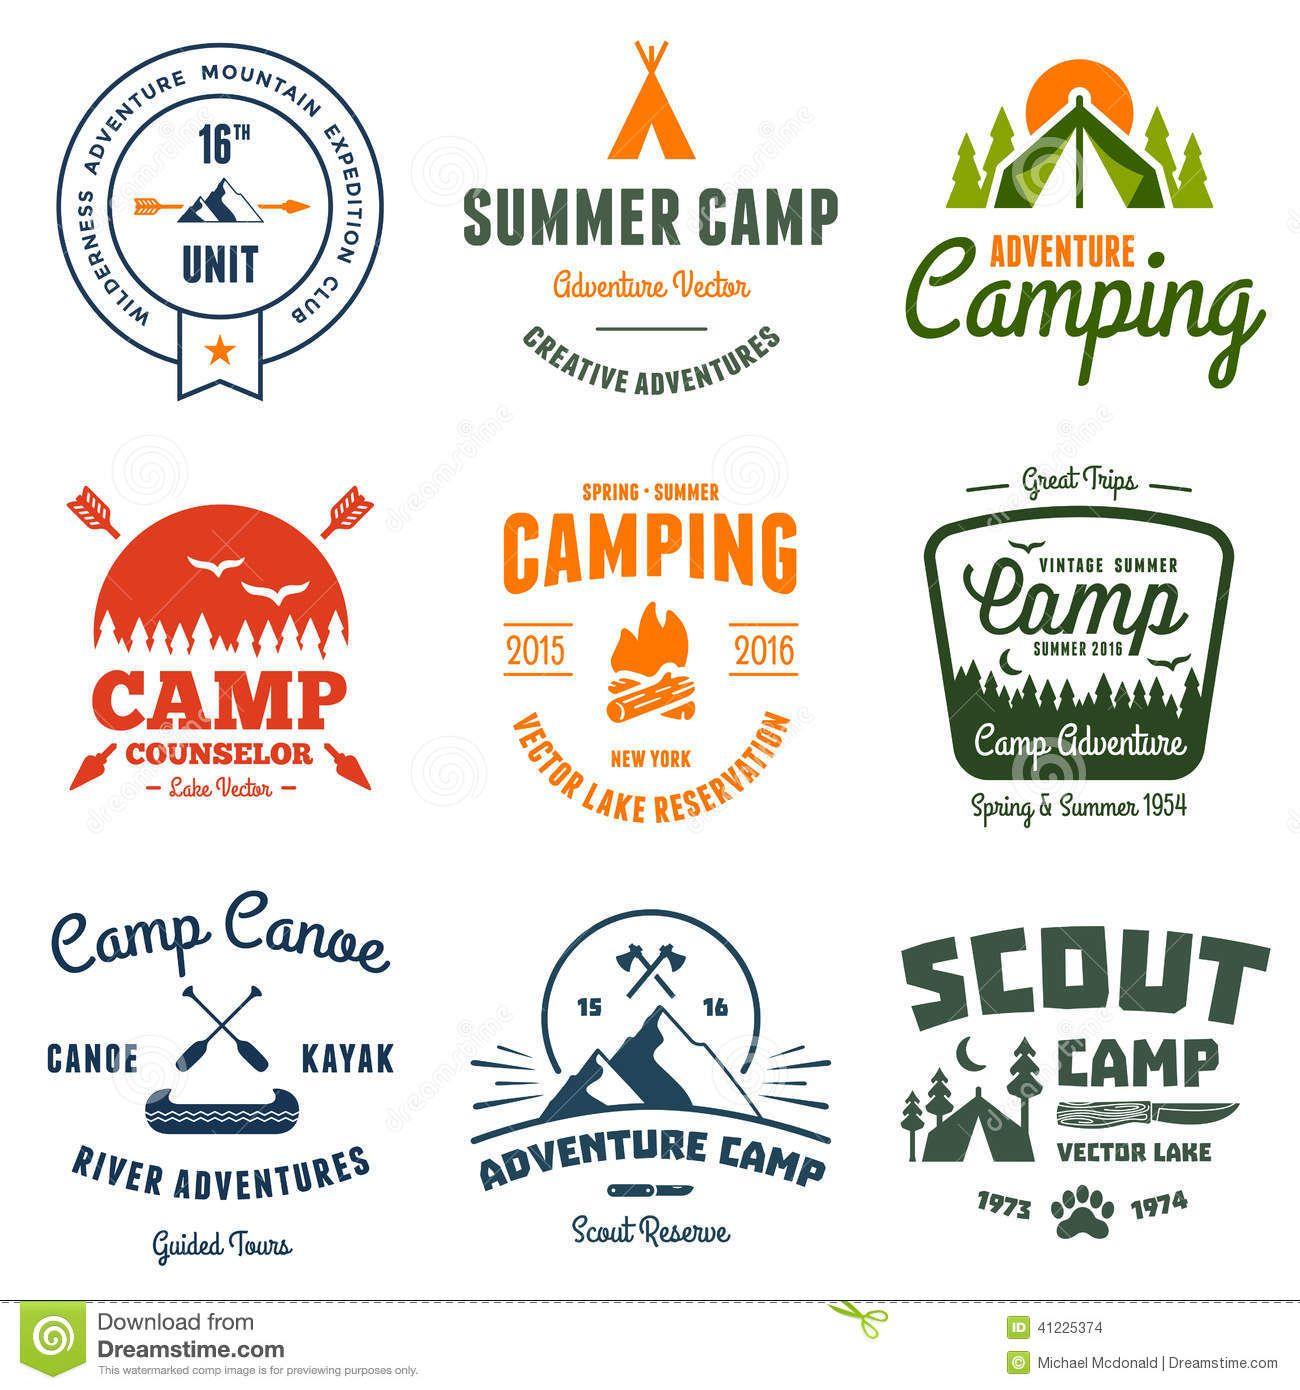 Summer Camp Logo - Vintage Camp Graphics - Download From Over 39 Million High Quality ...